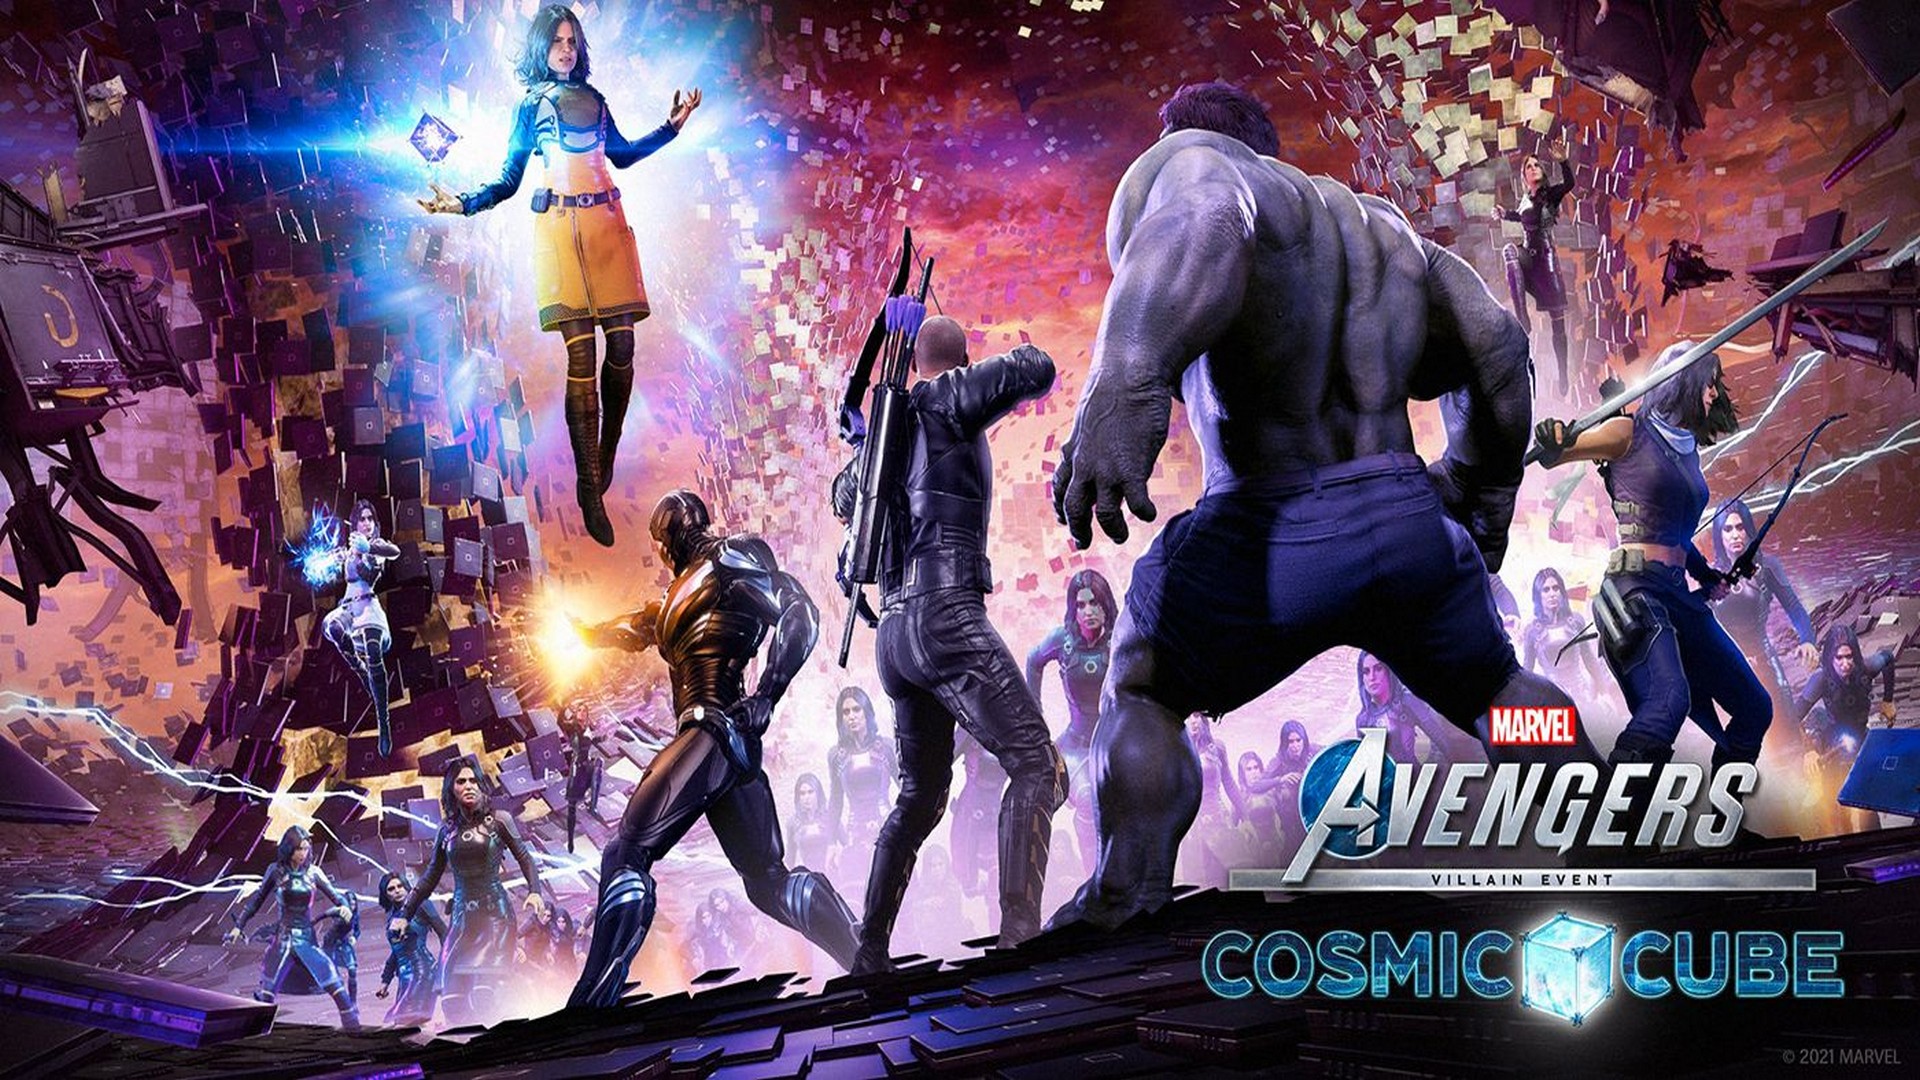 Marvel’s Avengers Update Introduces Powerful New Threat To Earth’s Mightiest Heroes: The Cosmic Cube